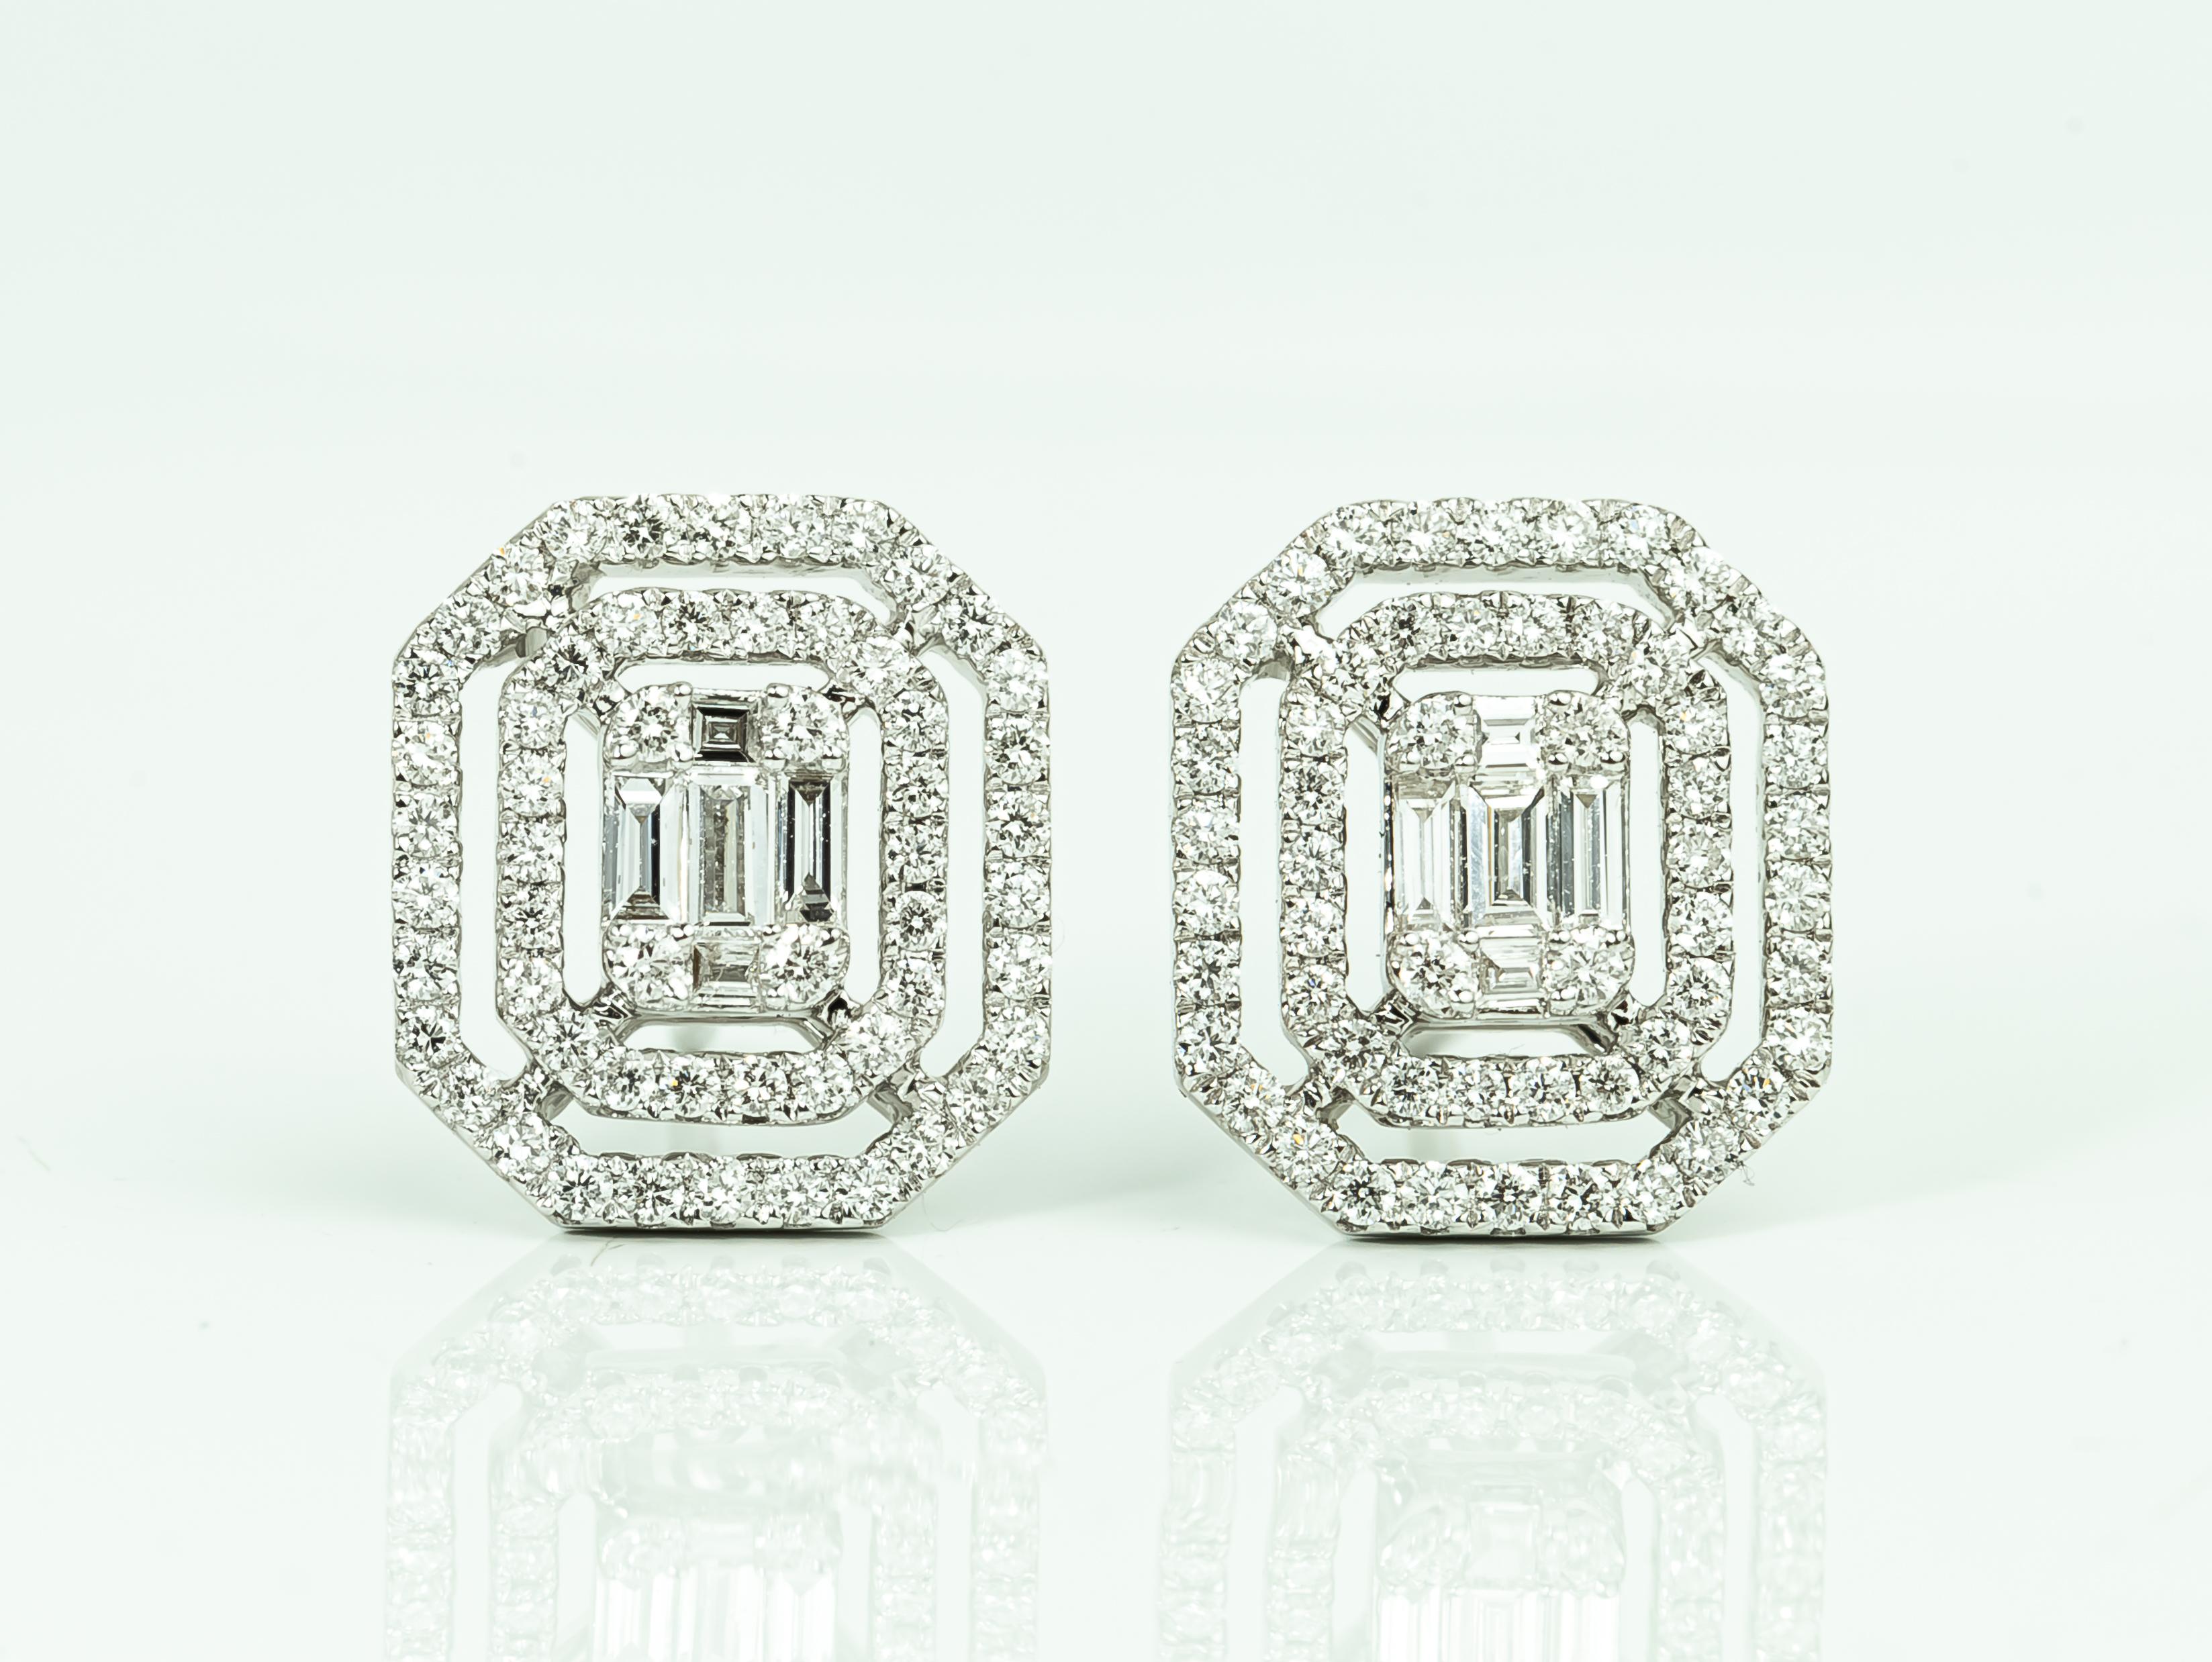 1 Carat Art Deco Diamond Baguette Cut Earrings with Illusion Setting, G VS In New Condition For Sale In Jaipur, RJ